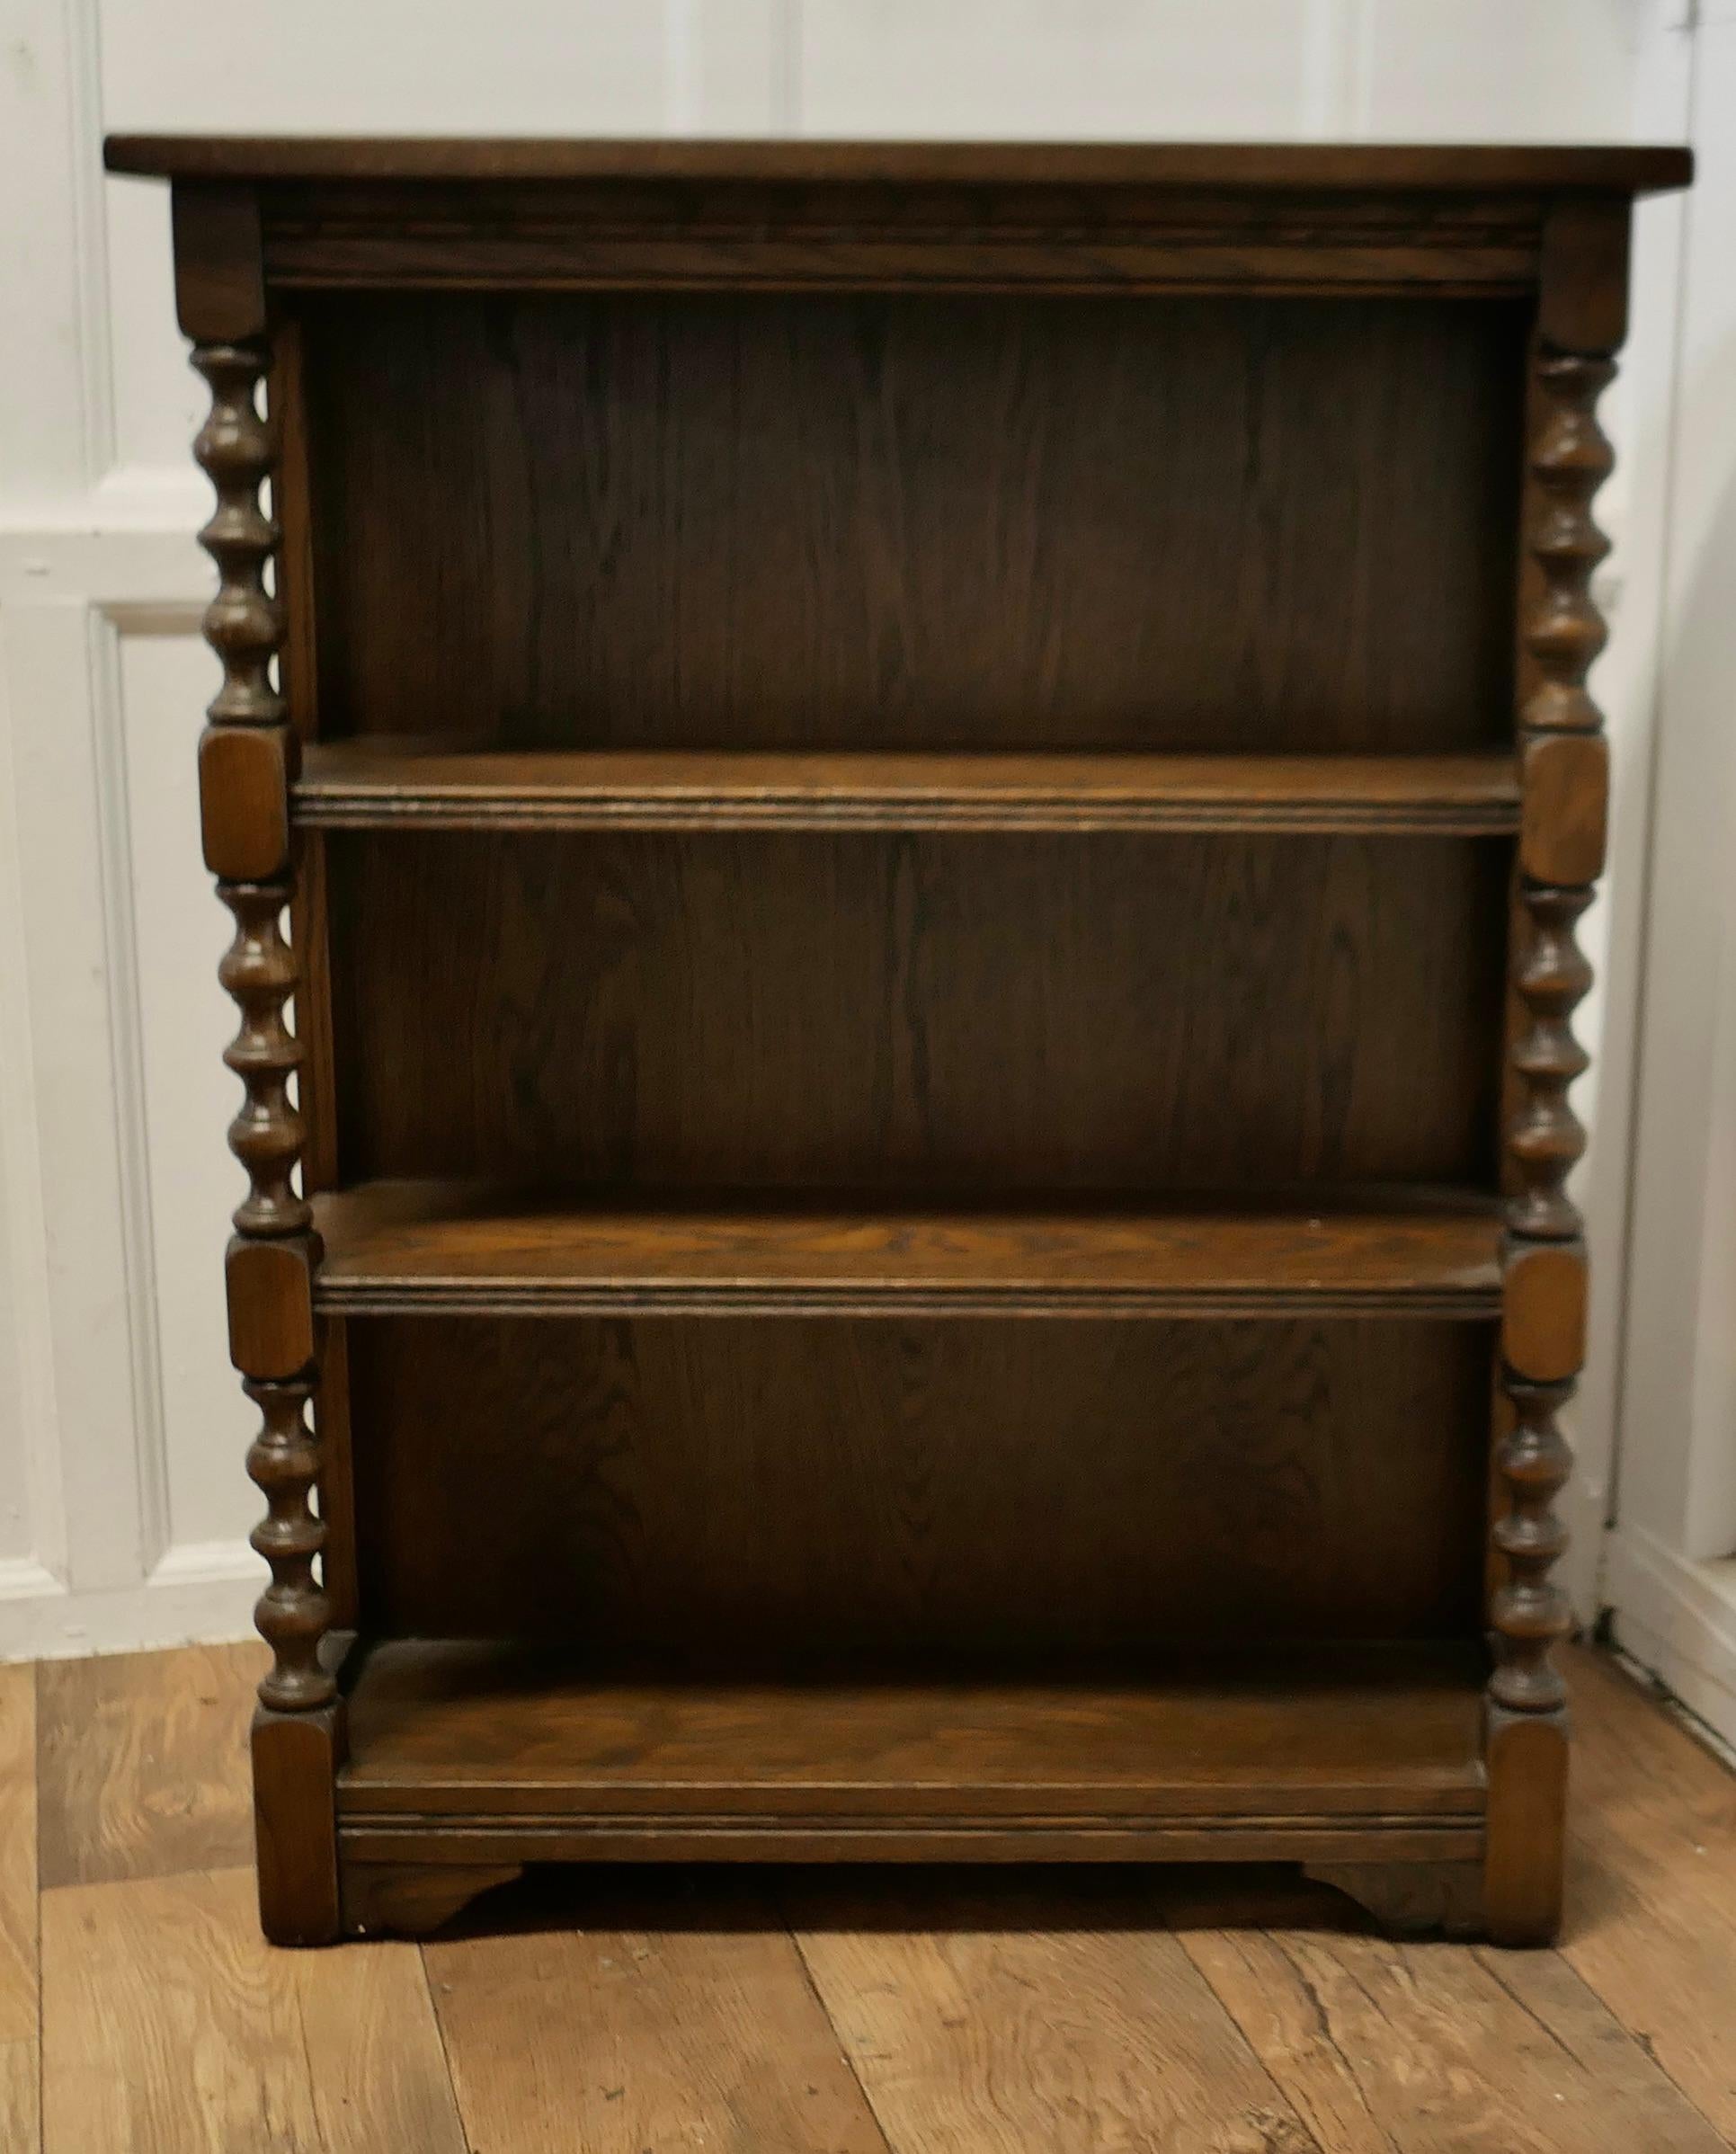 Gothic Style Oak Open Bookcase by Old Charm

A Charming little piece dating from about 1920, the bookcase has attractive bobbin turned columns at each side supporting the shelves
TheBookcase is made by Old Charm, a company know for their quality
All